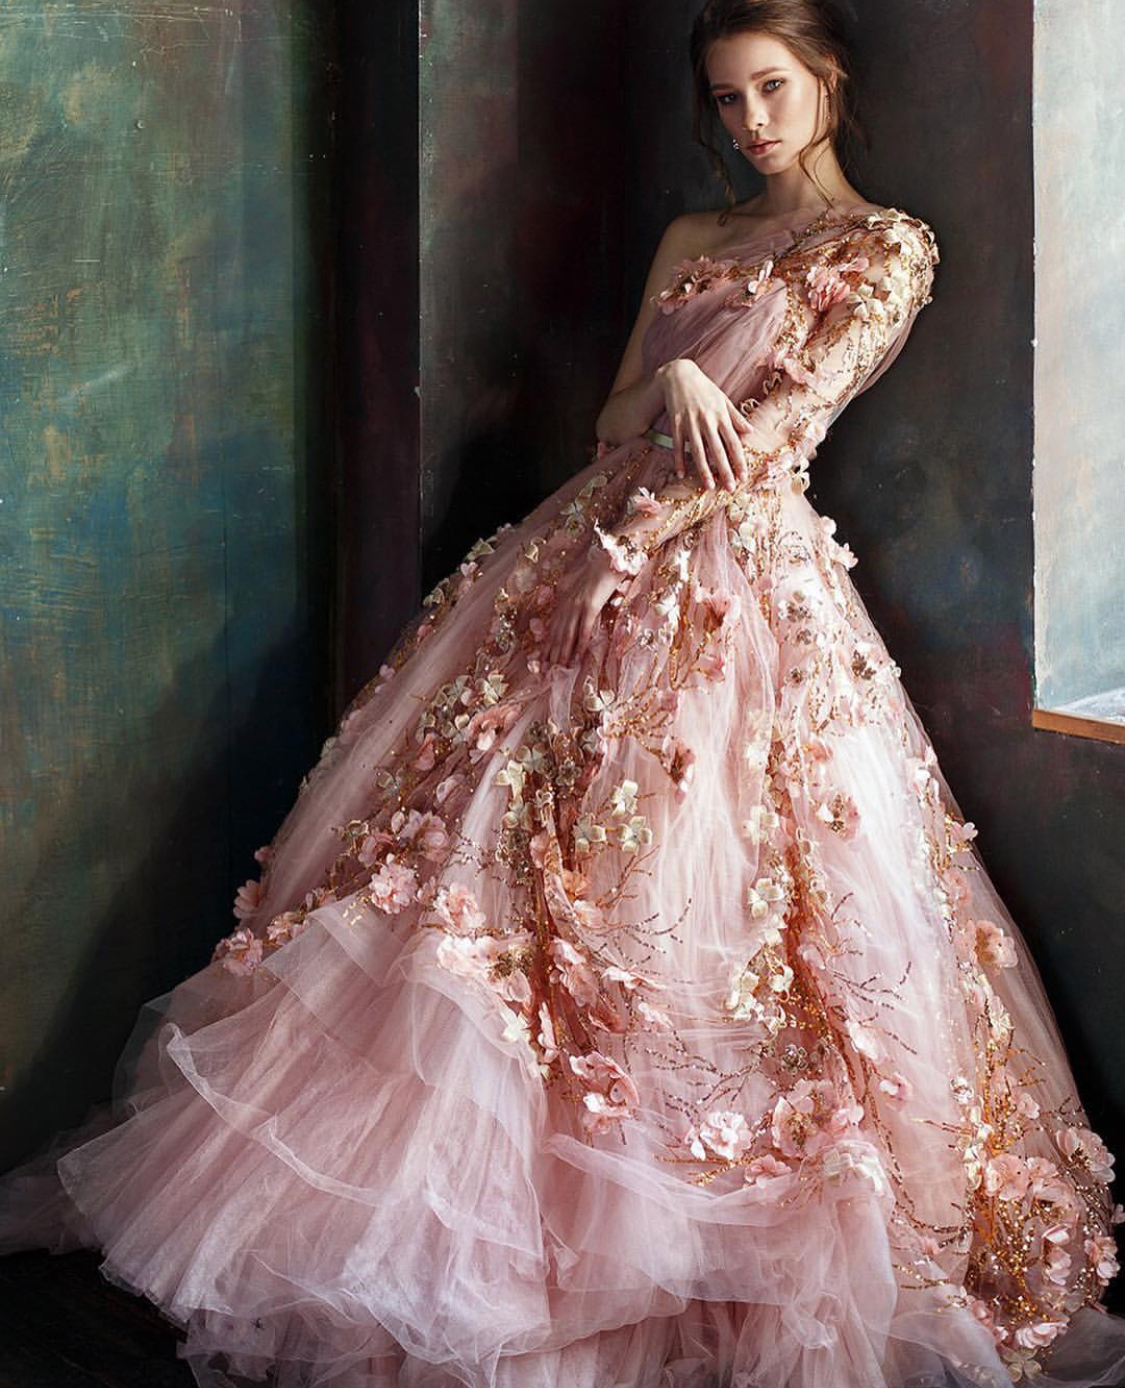 10 unbelievable floral wedding gowns for spring